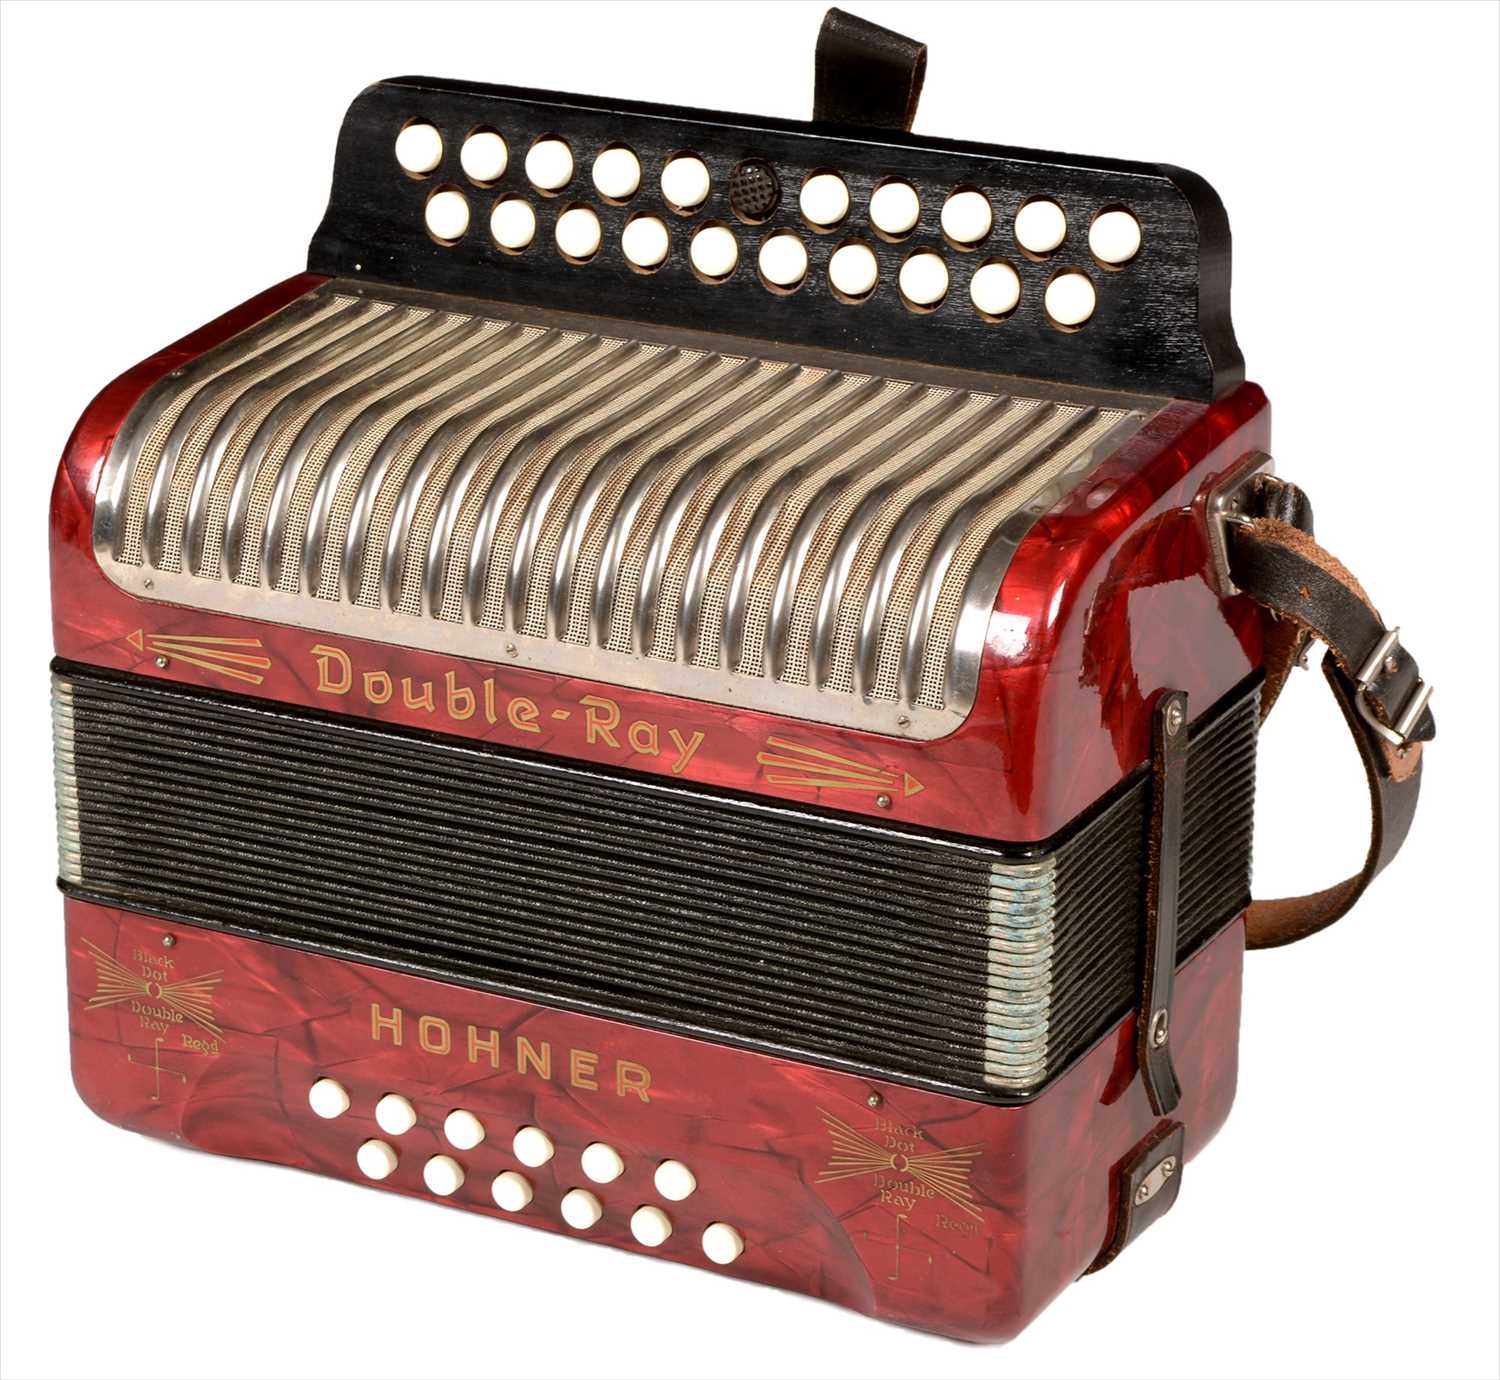 Lot 3 - Hohner button accordion.